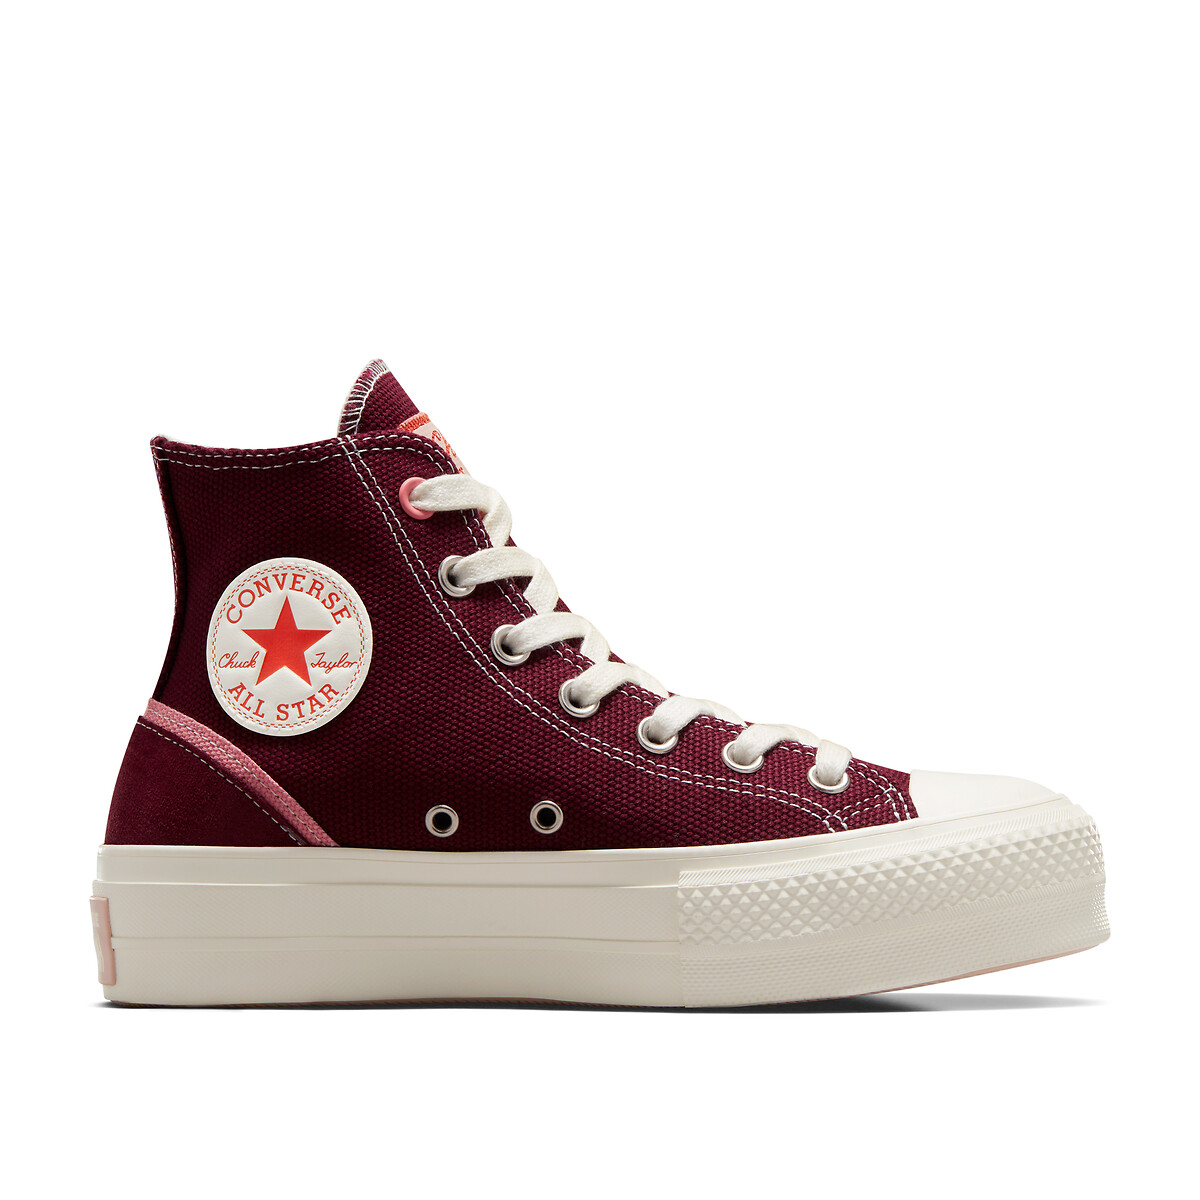 Image of All Star Lift Hi City Utility Canvas High Top Trainers